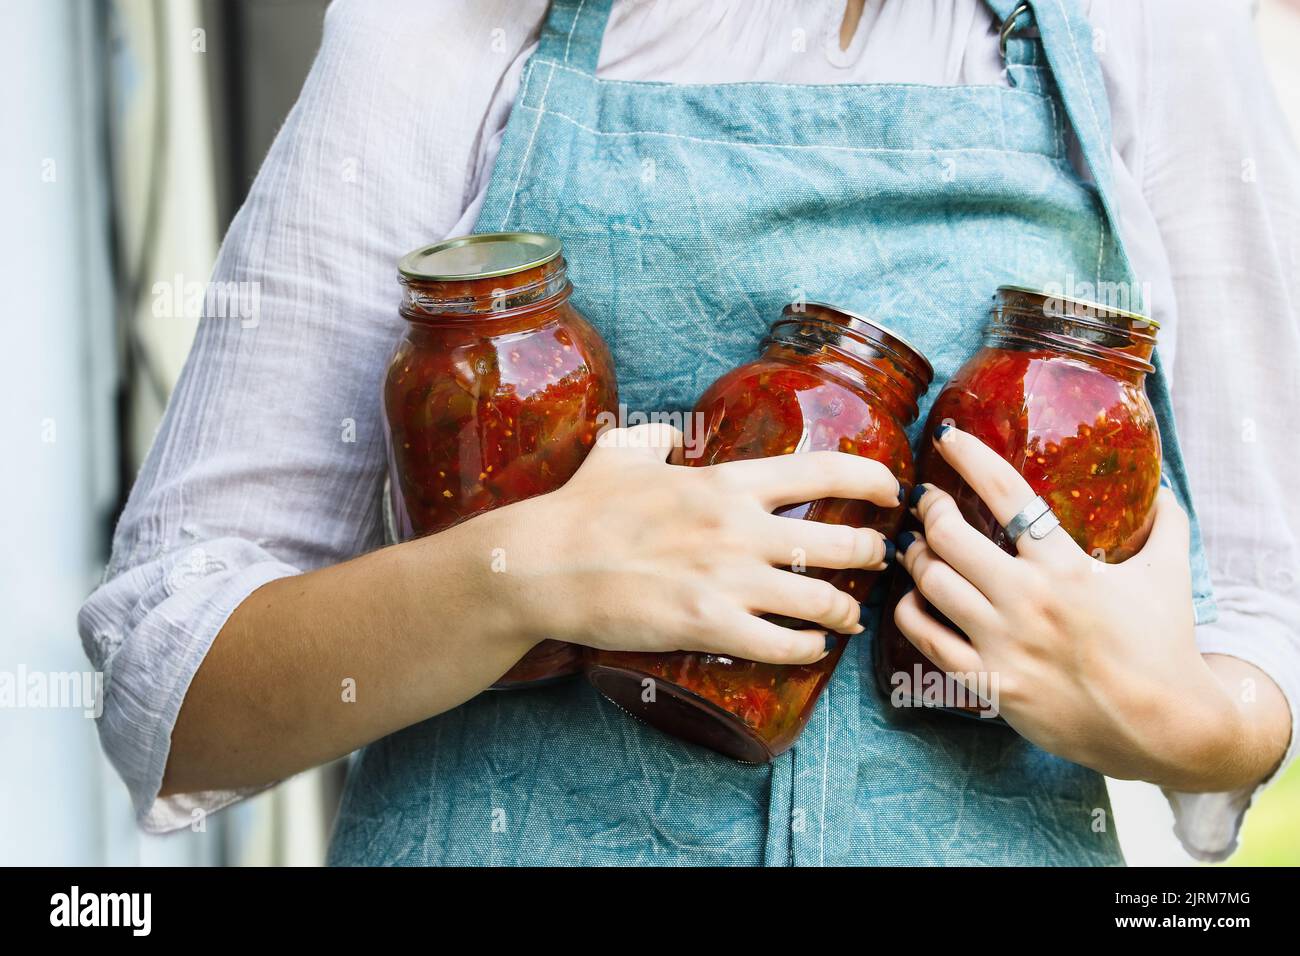 Woman's hands holding homemade canned quart mason jars of tomato salsa. Selective focus with blurred background. Stock Photo